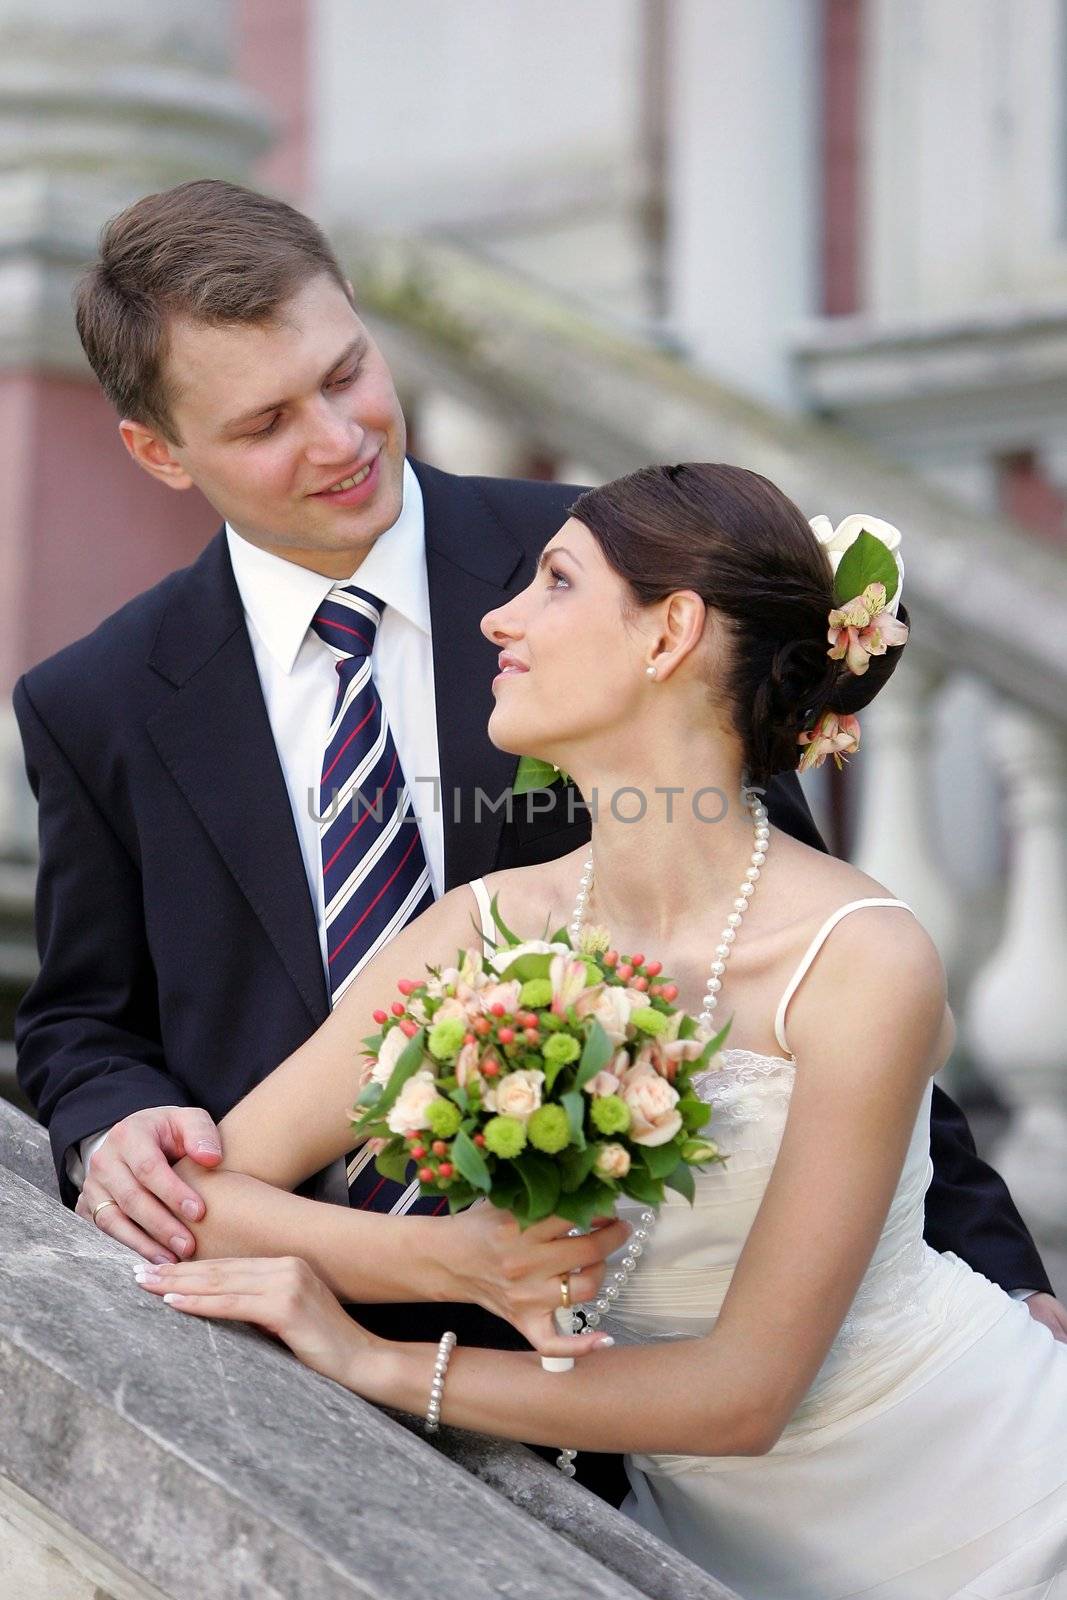 Happy newlywed couple looking lovingly at each other outdoors.